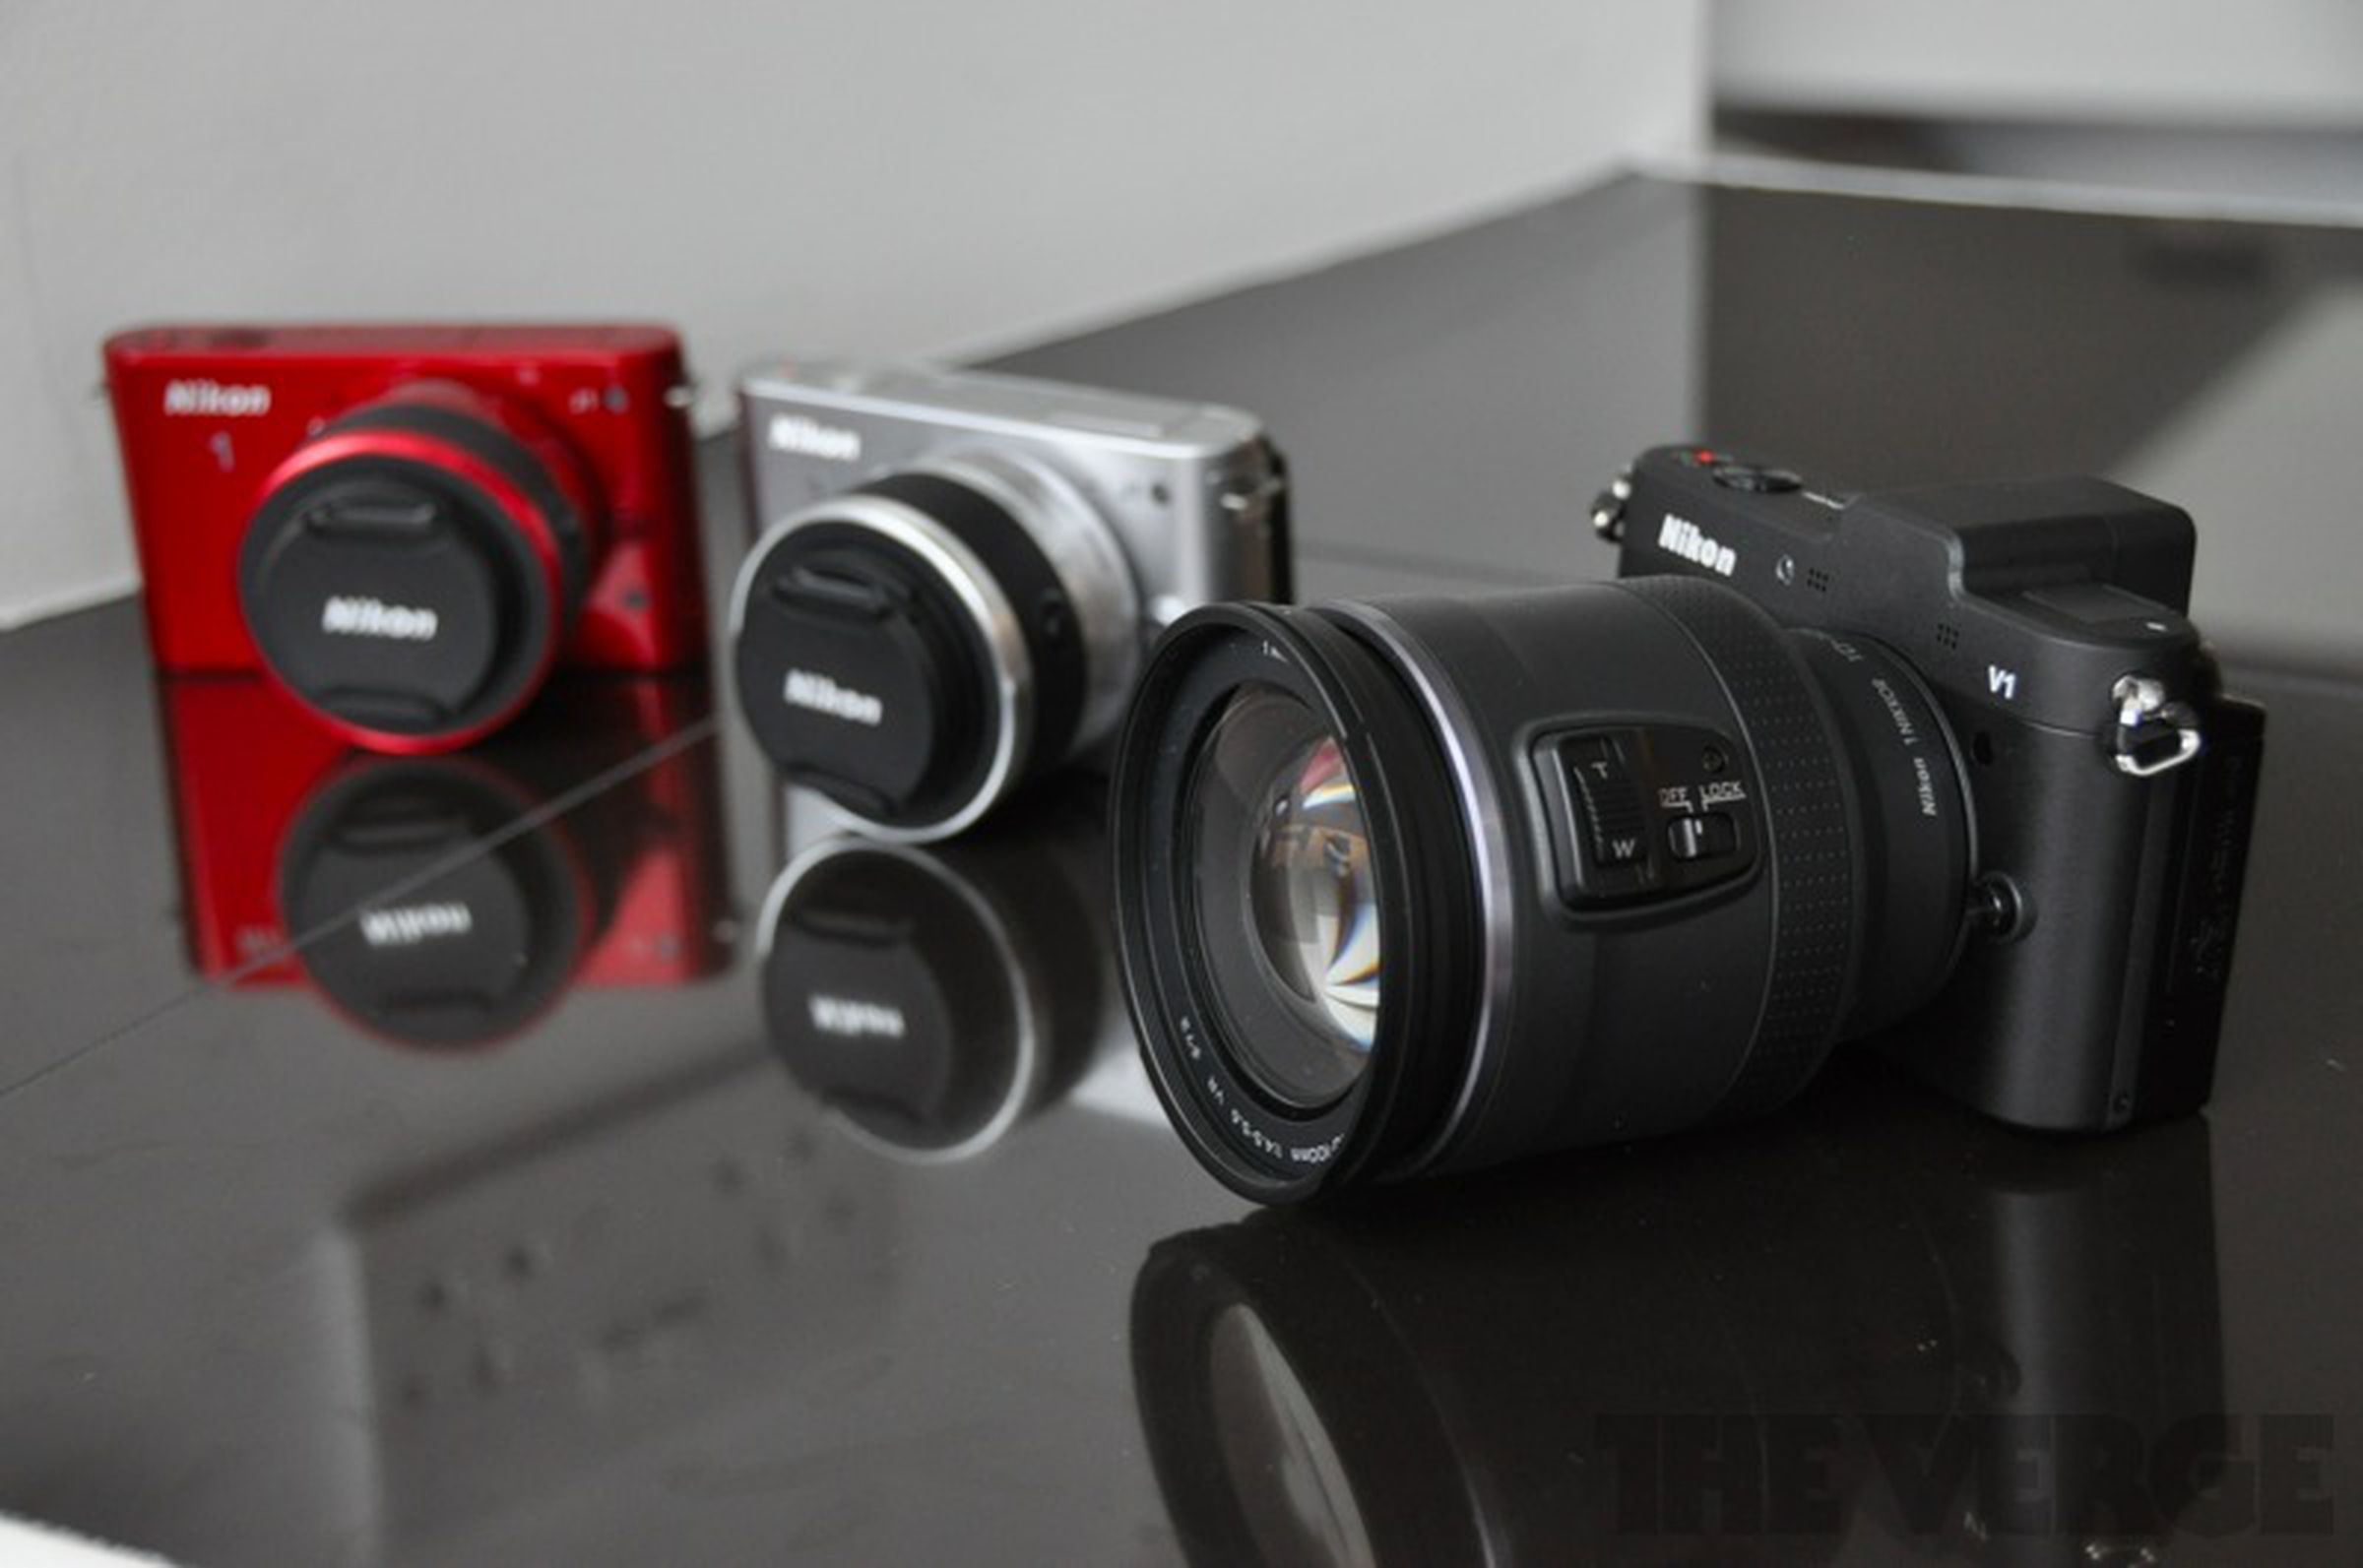 Nikon V1 and J1 hands-on pictures